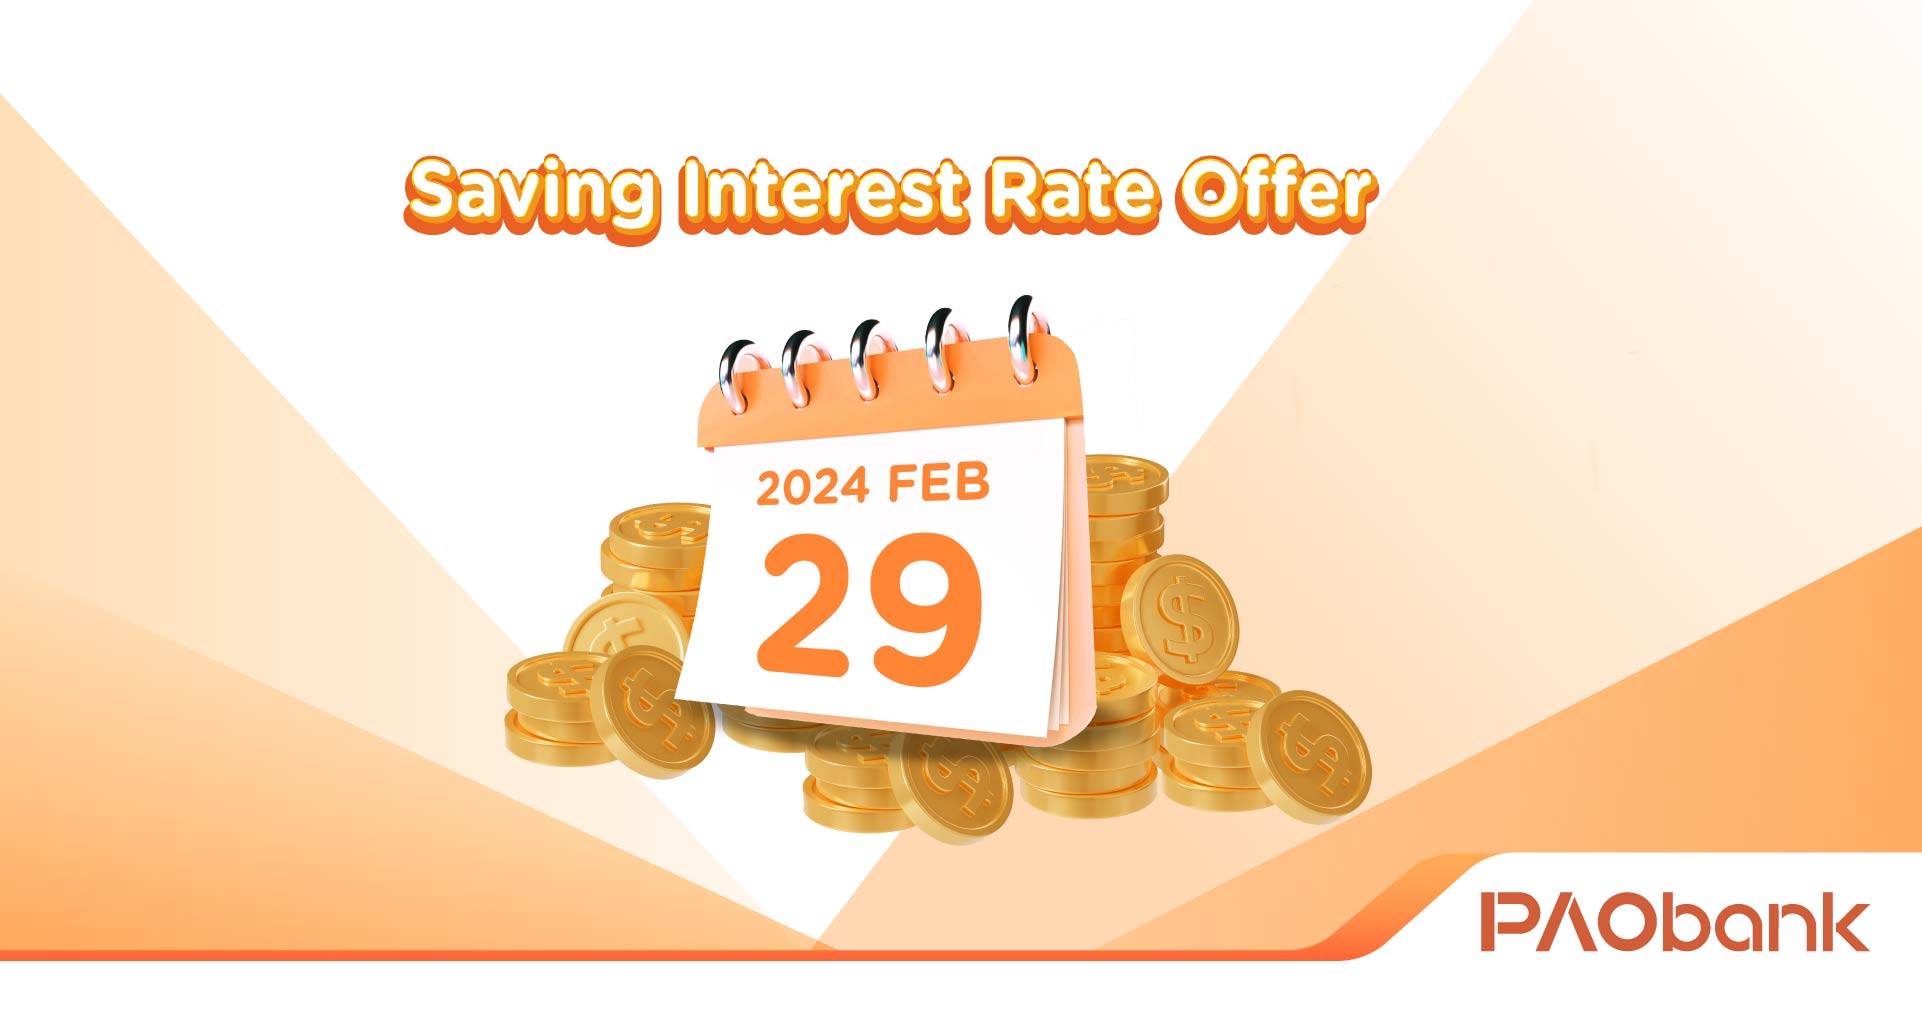 PAOB Saving Interest Rate Offer Offer Extended